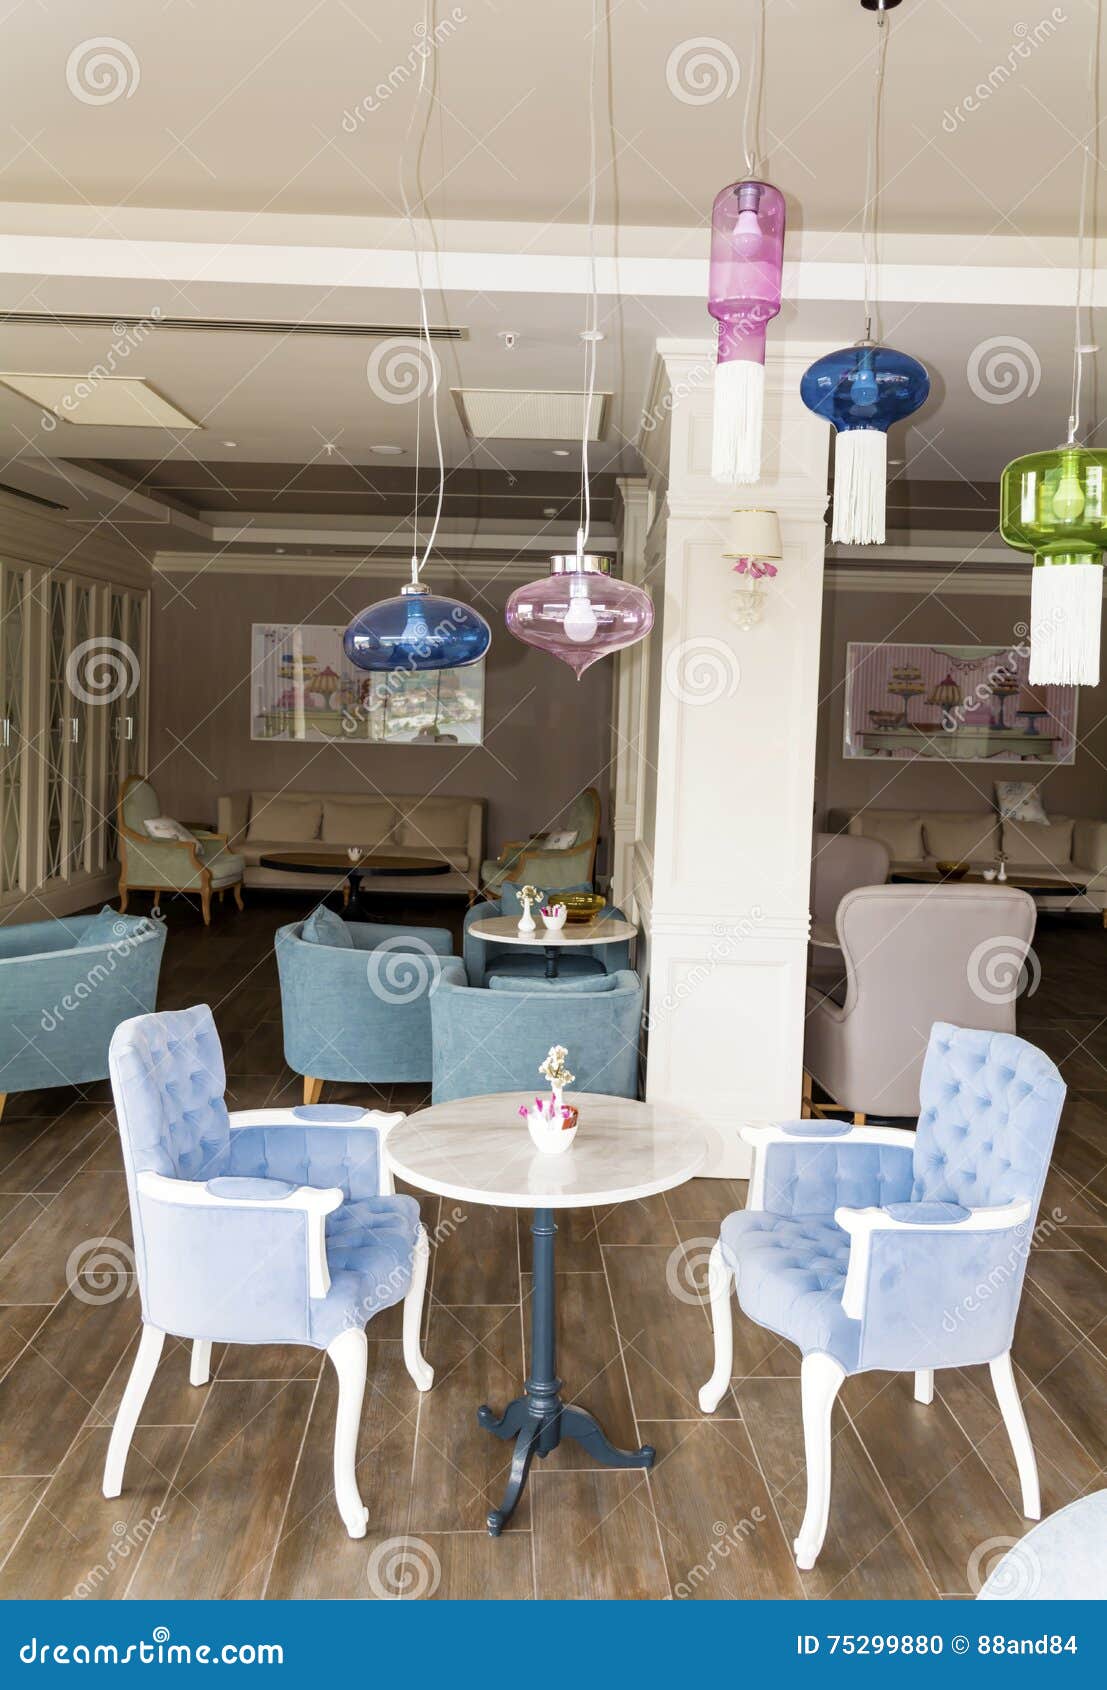 Modern Bar Interior With Blue Chairs Editorial Image Image Of